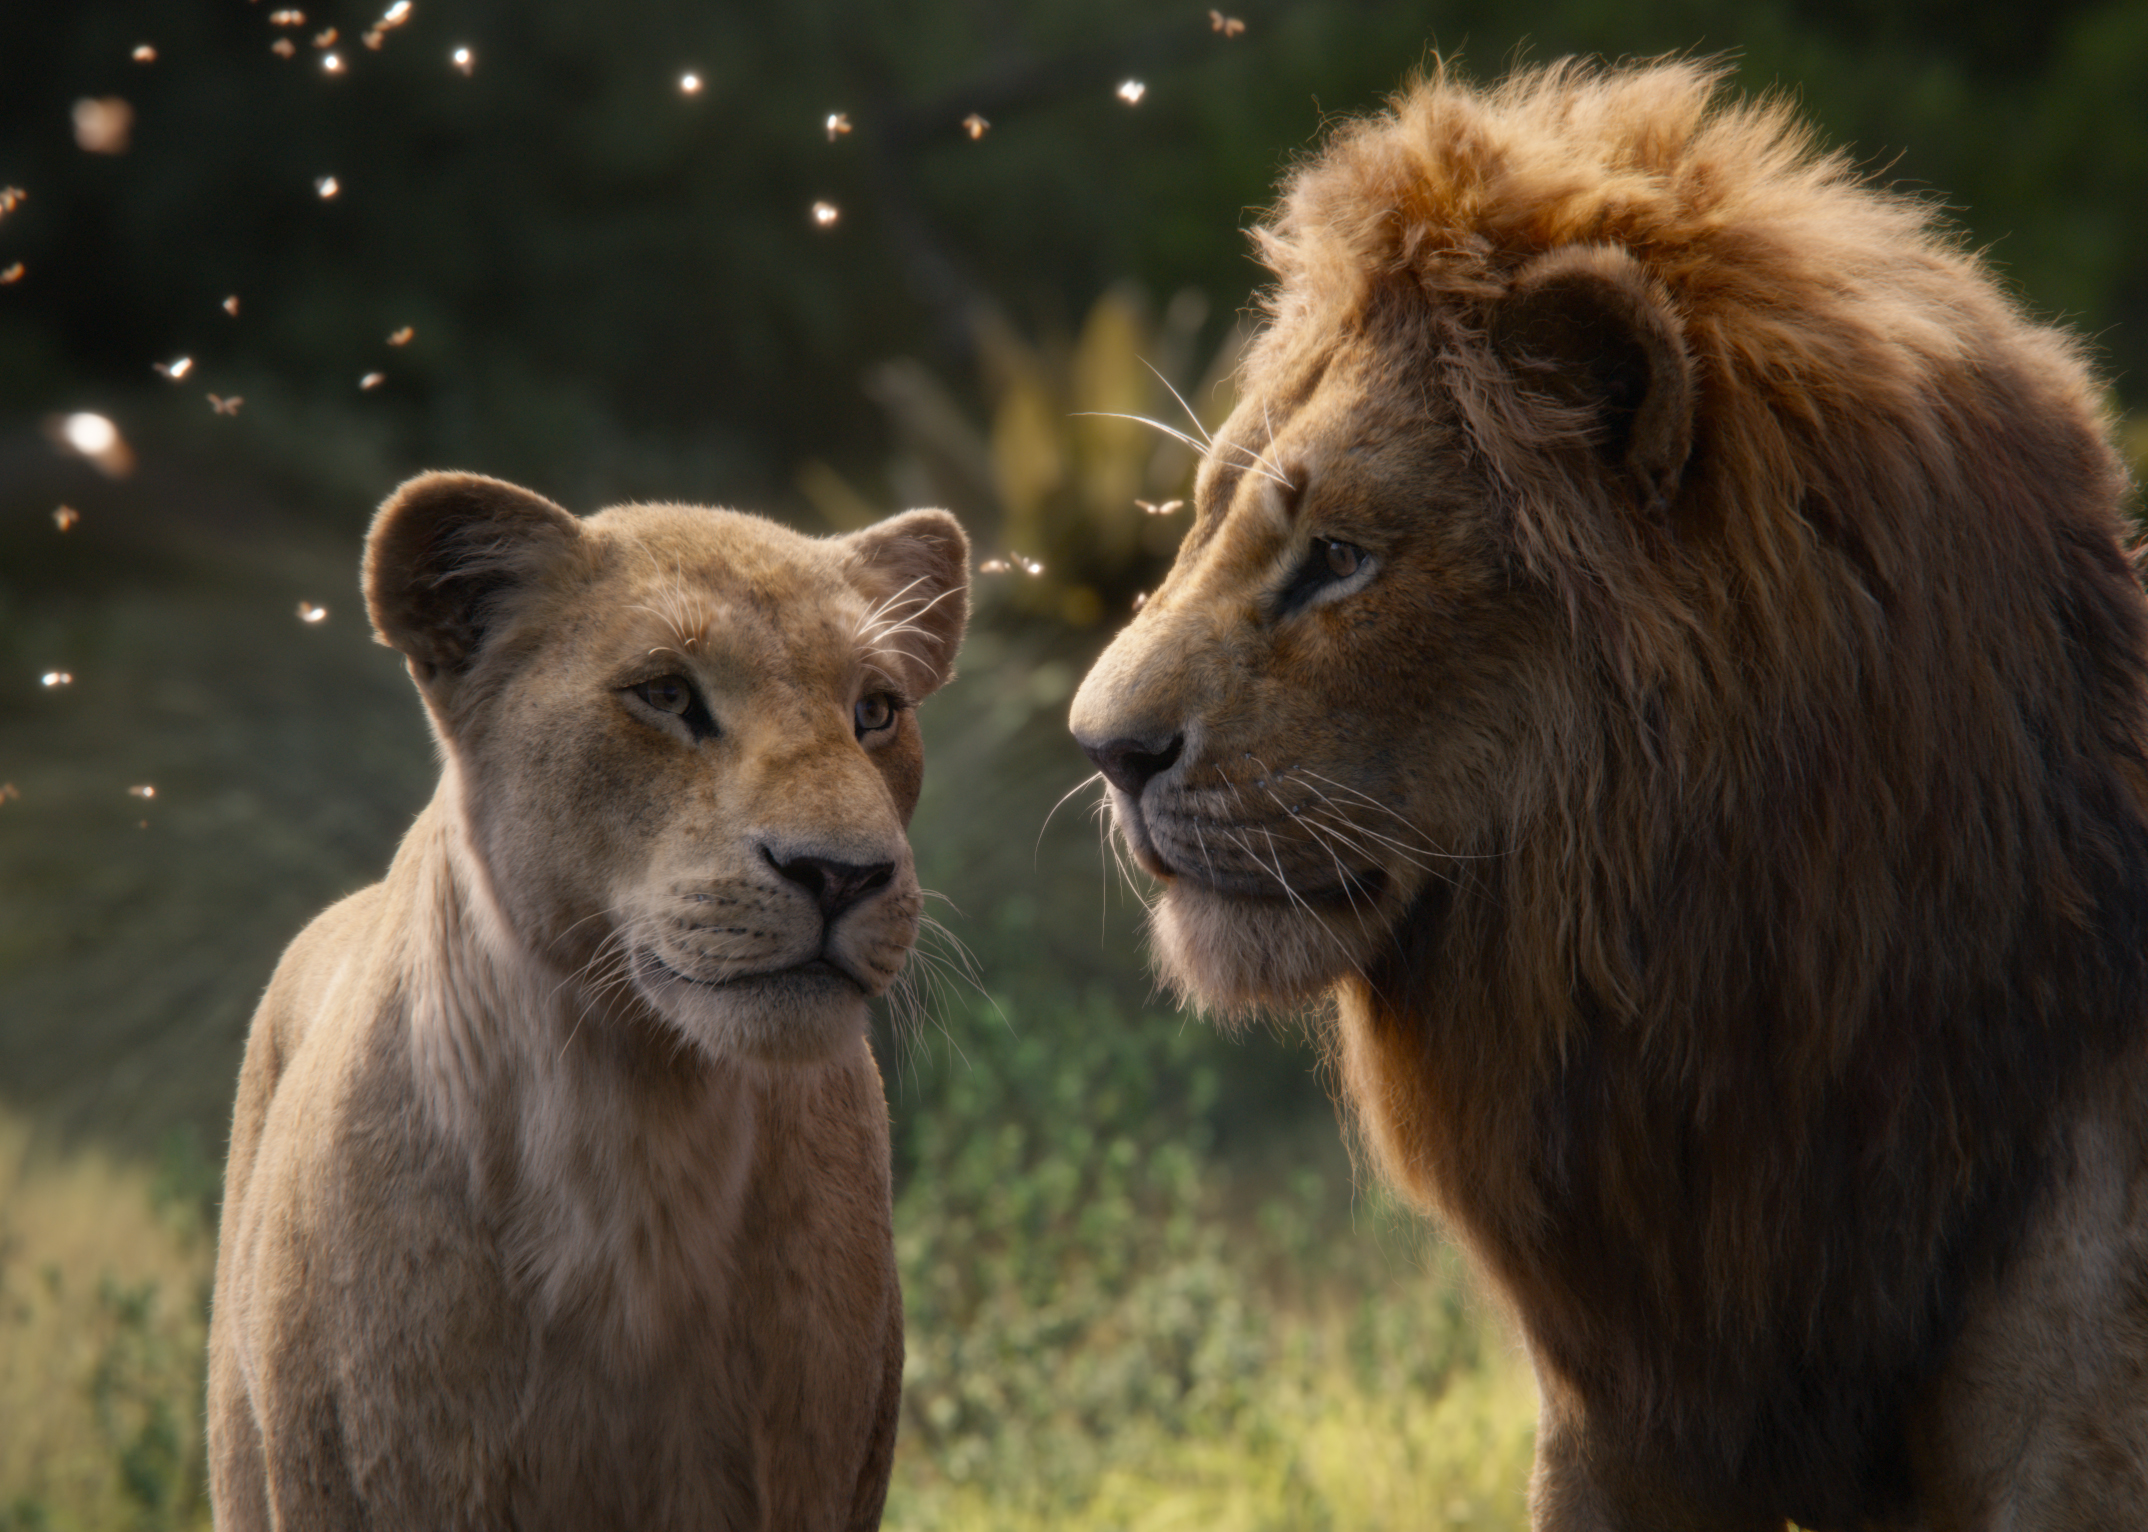 Simba and Nala in The Lion King